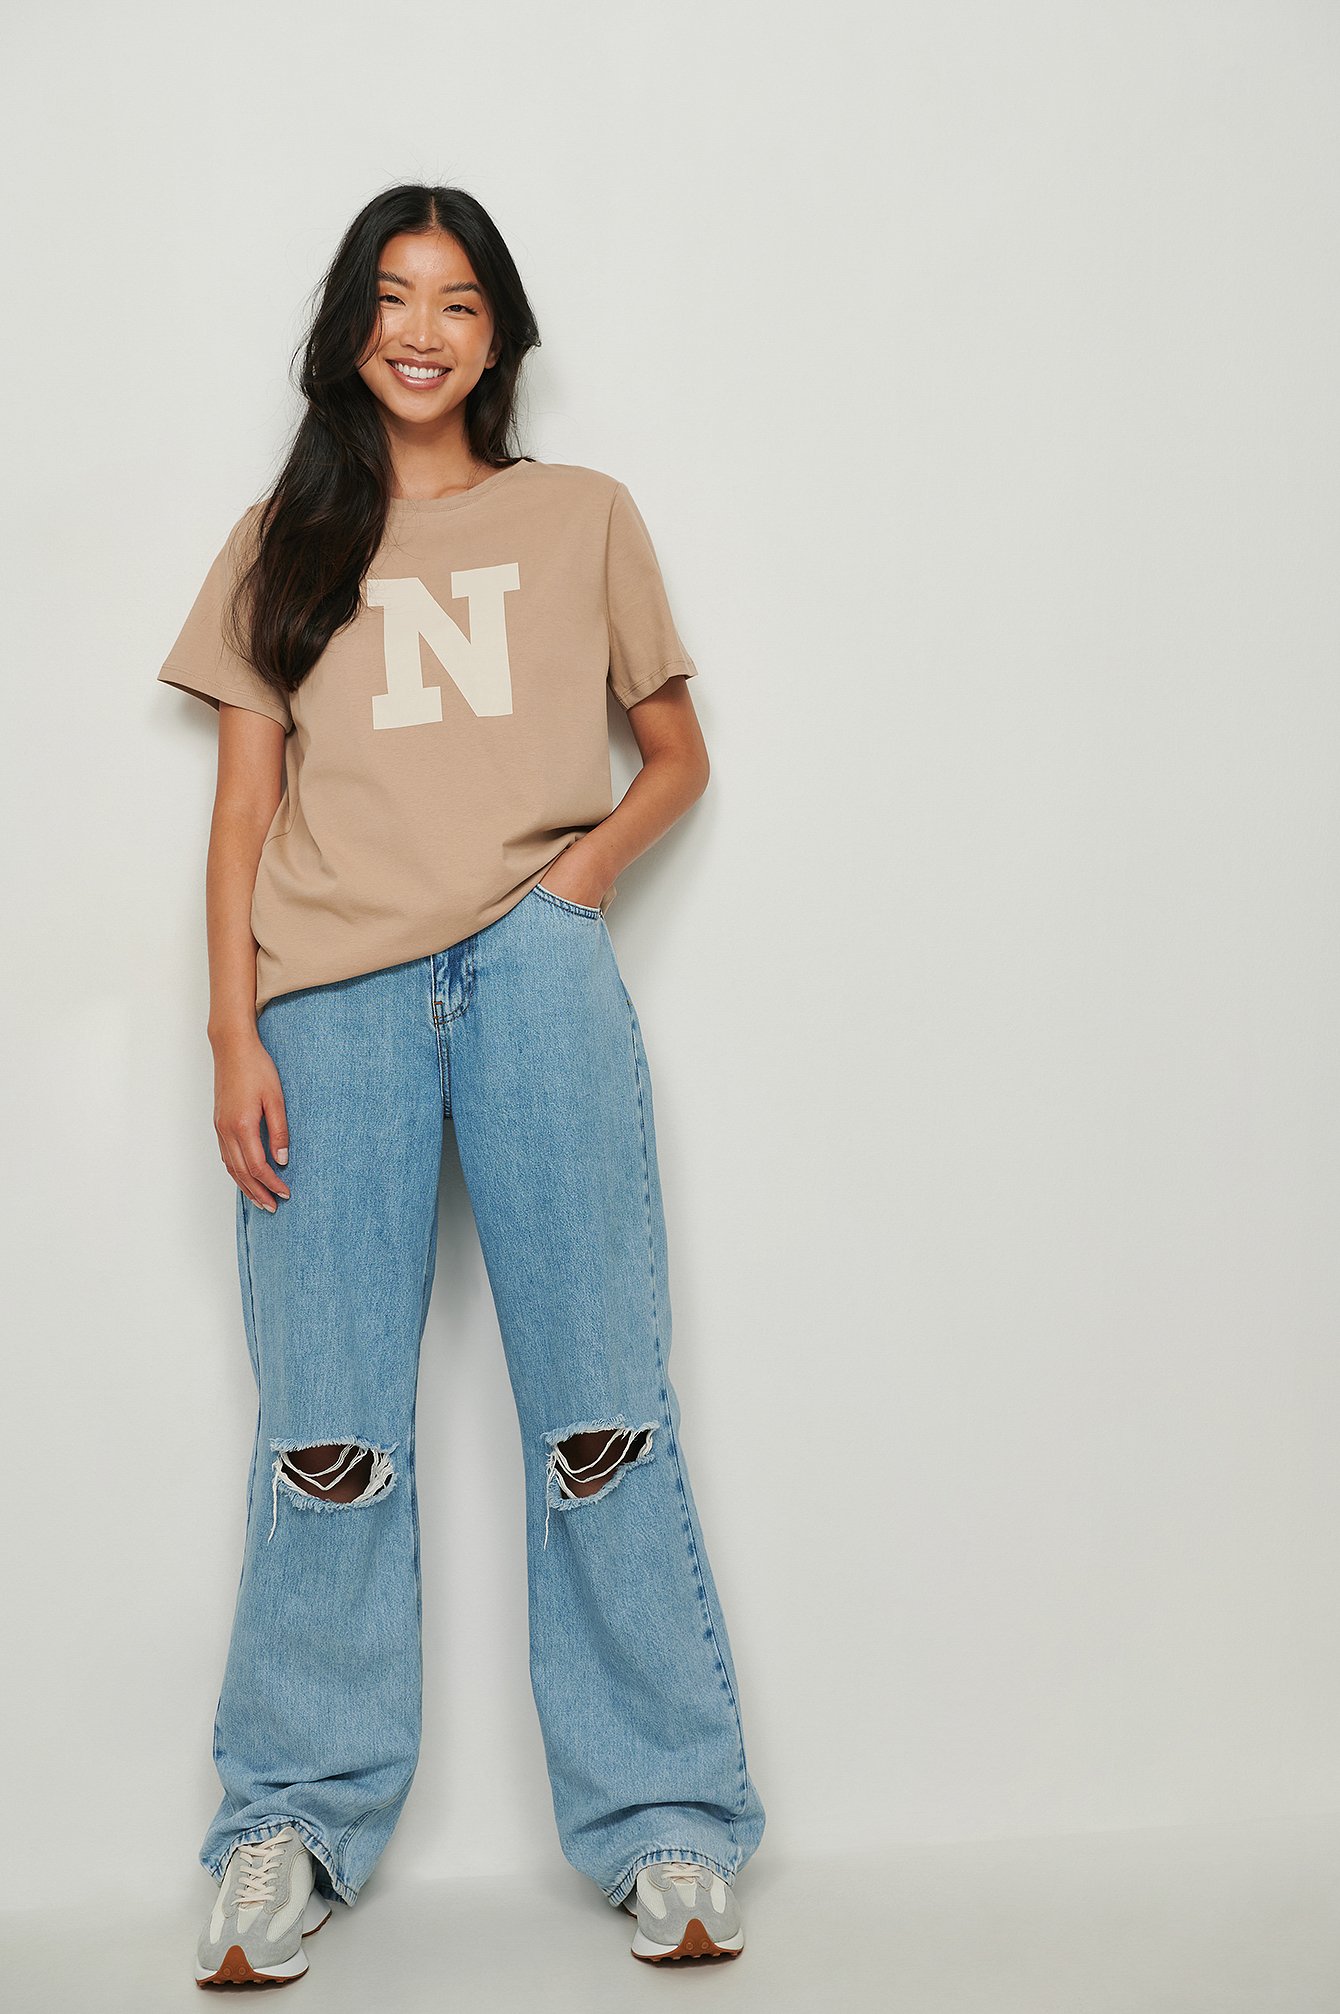 Letter Printed Tee Outfit